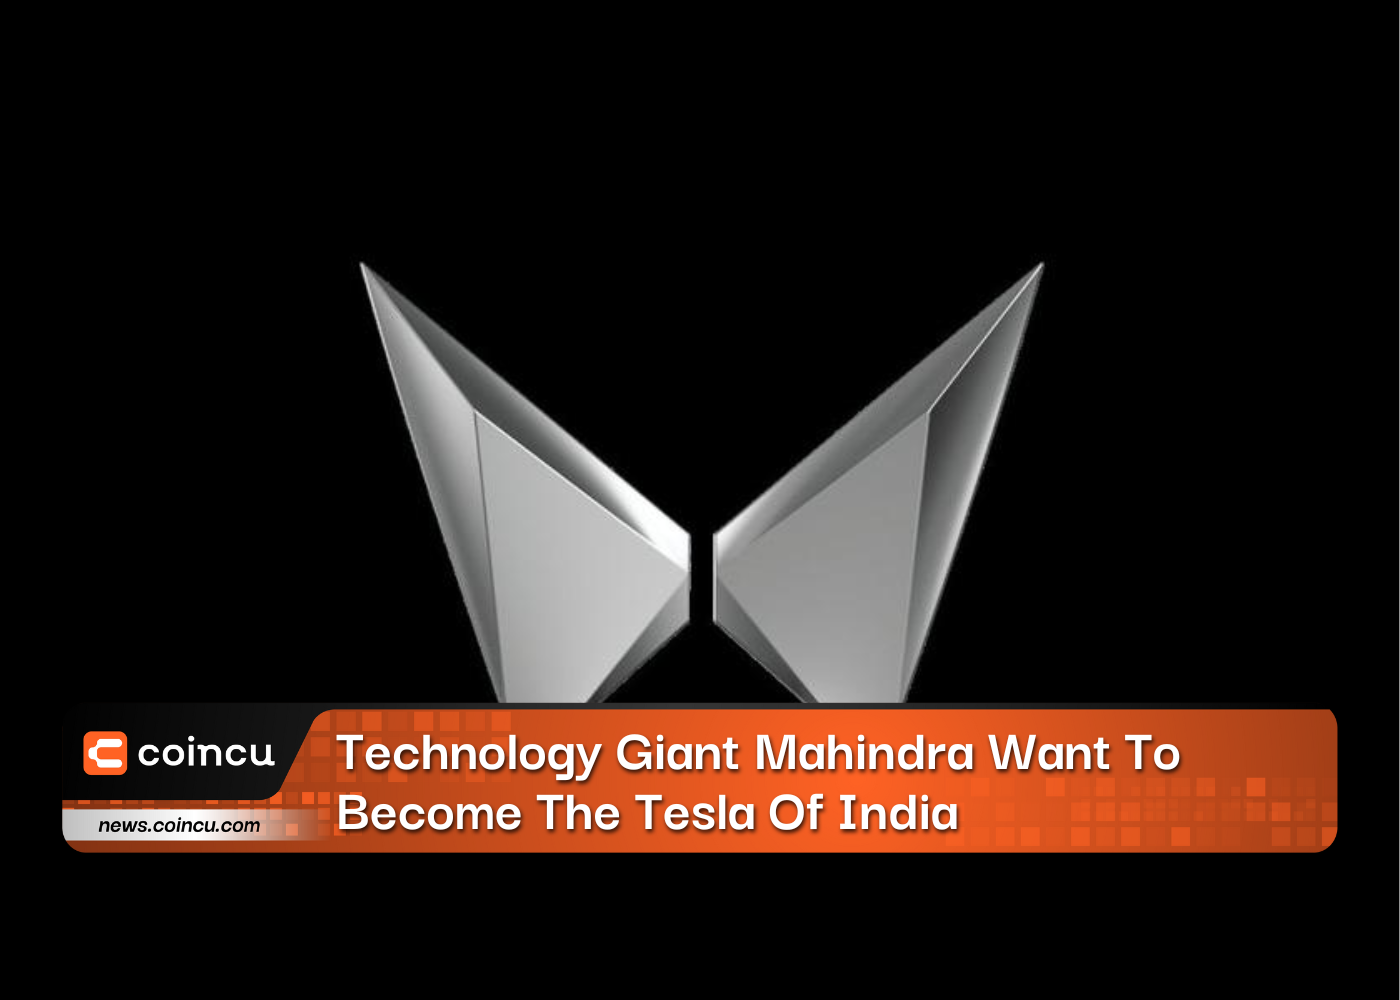 Technology Giant Mahindra Want To Become The Tesla Of India